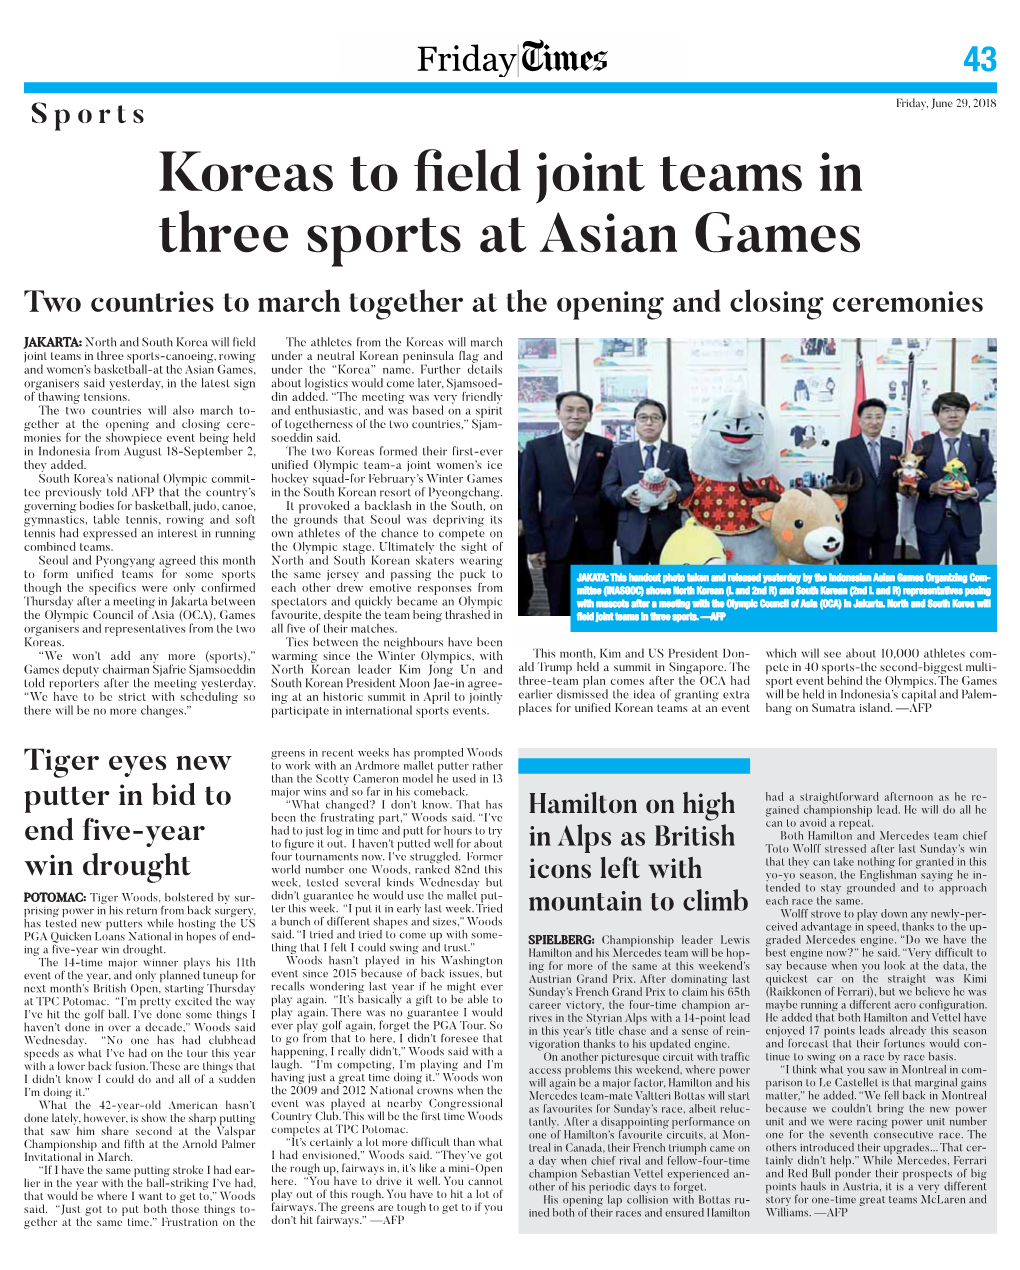 Koreas to Field Joint Teams in Three Sports at Asian Games Two Countries to March Together at the Opening and Closing Ceremonies